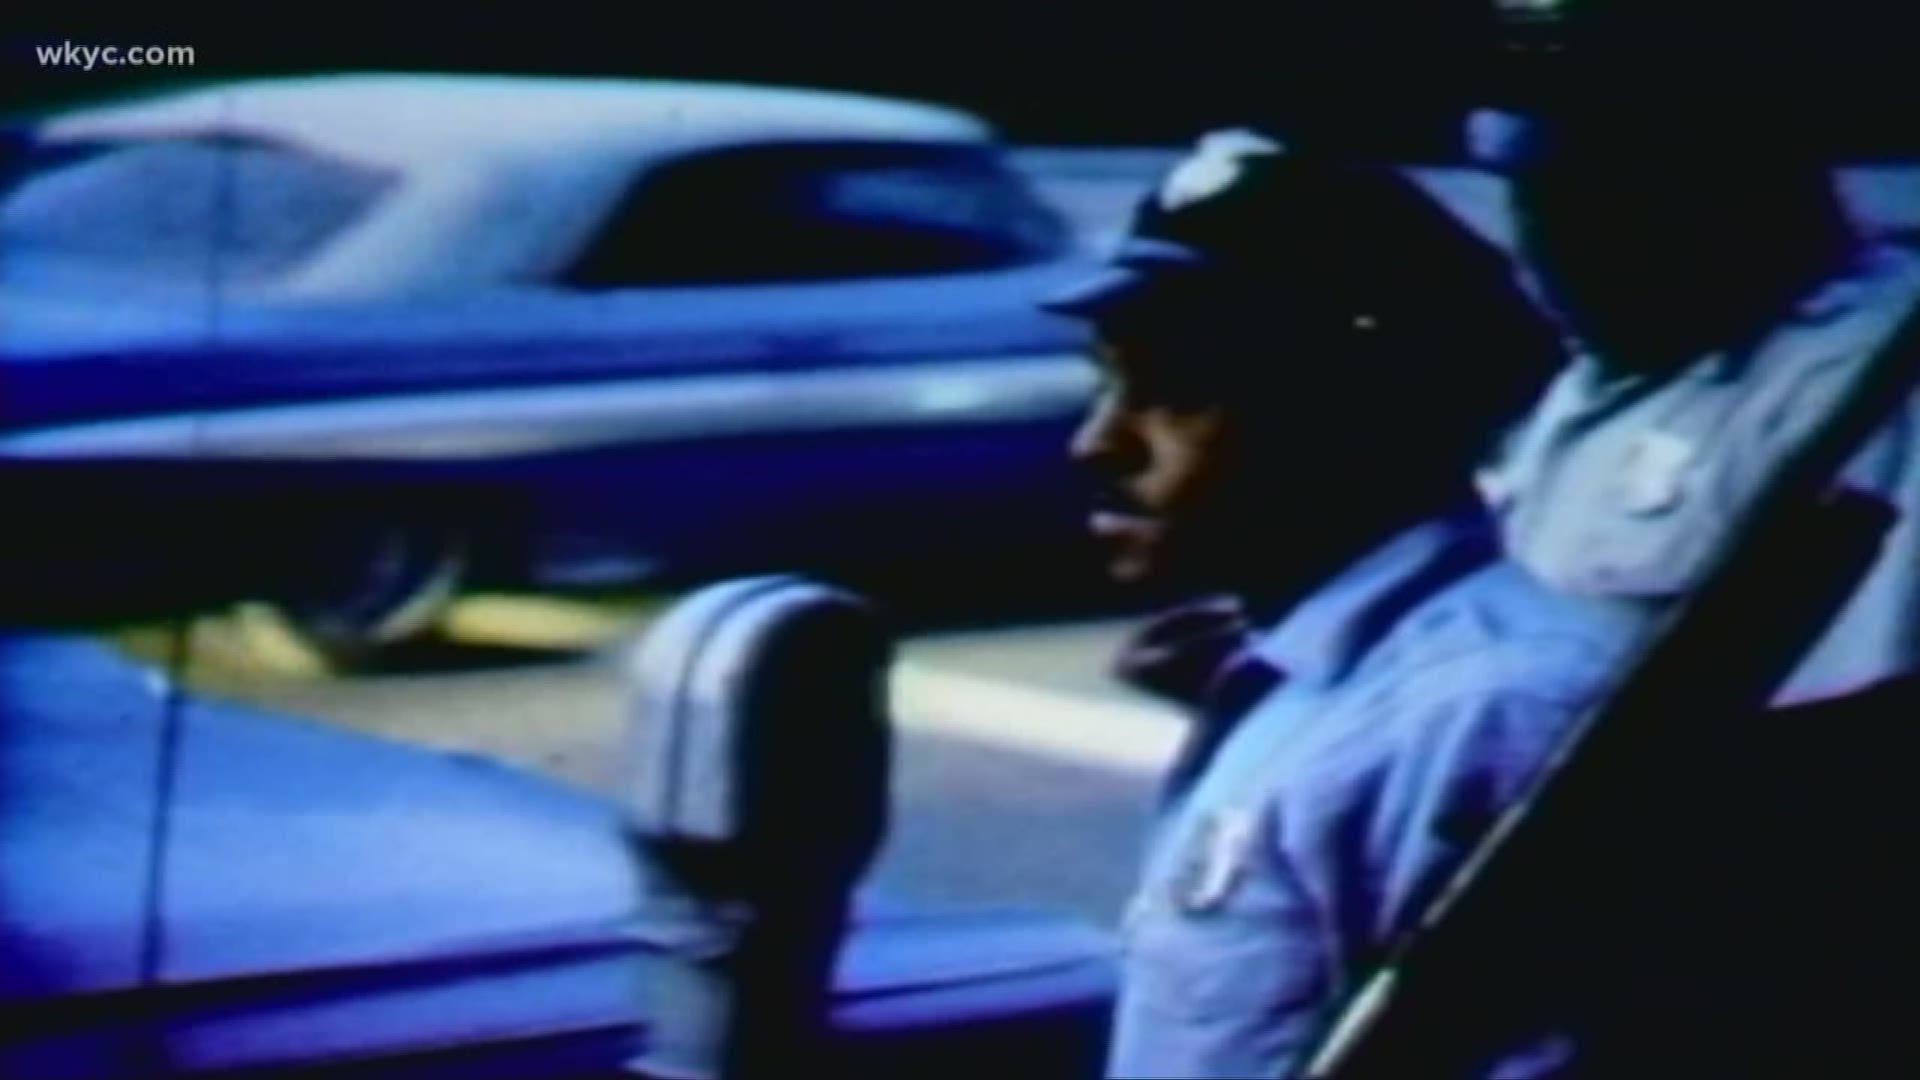 Part 1 of "50 years later: How race and rebellion sparked the Glenville shootout"